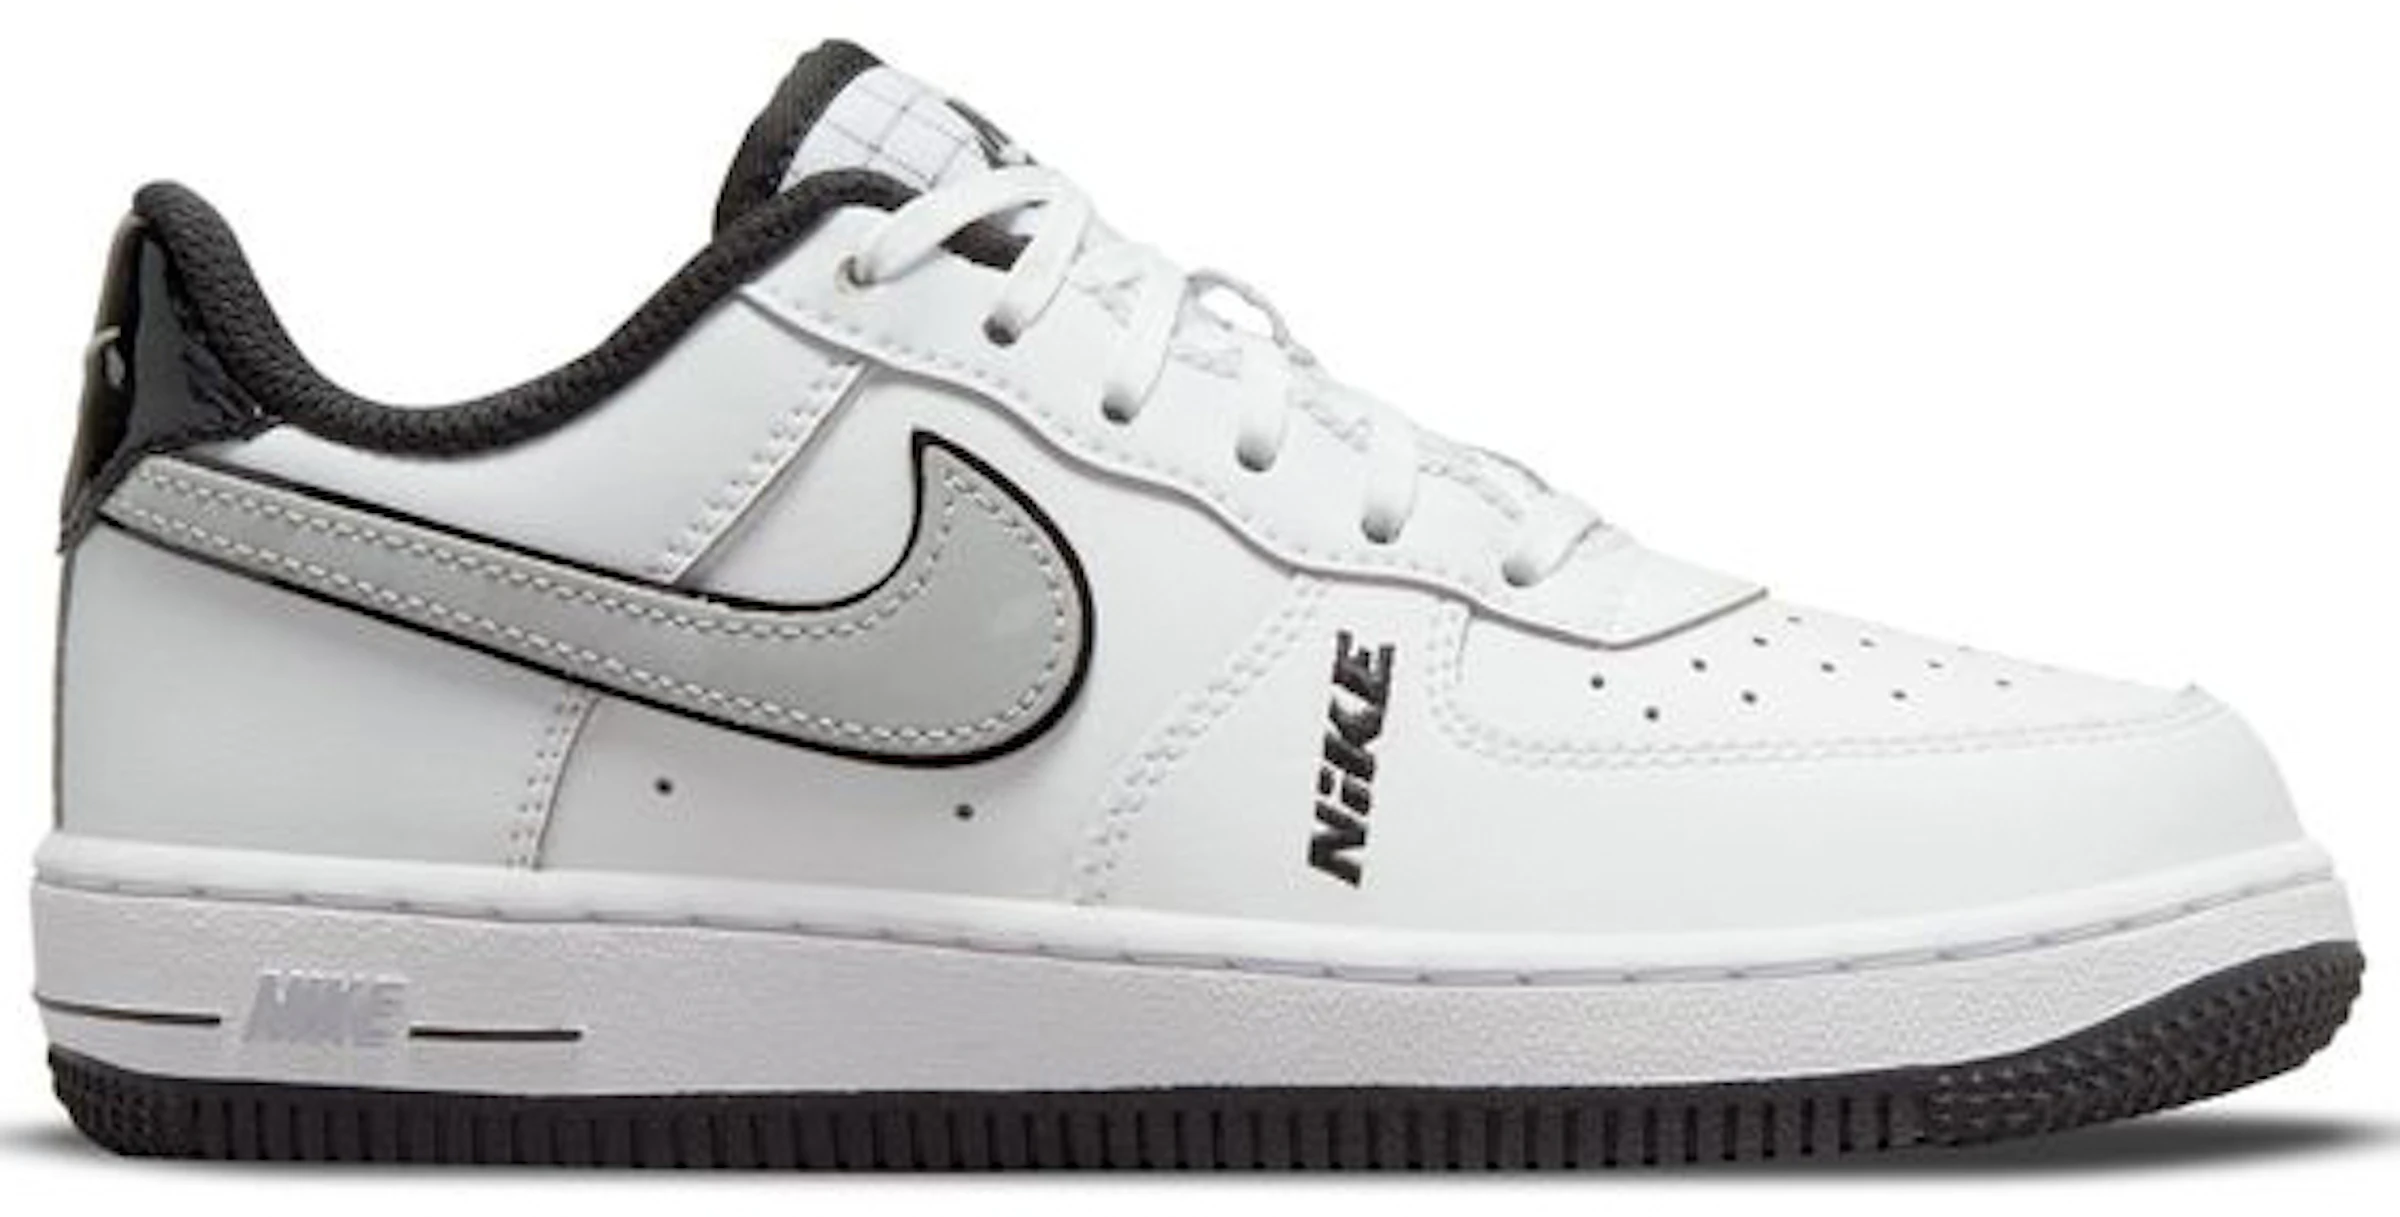 Nike Air Force Low LV8 White Black Wolf Grey (PS) - DO3807-101 -